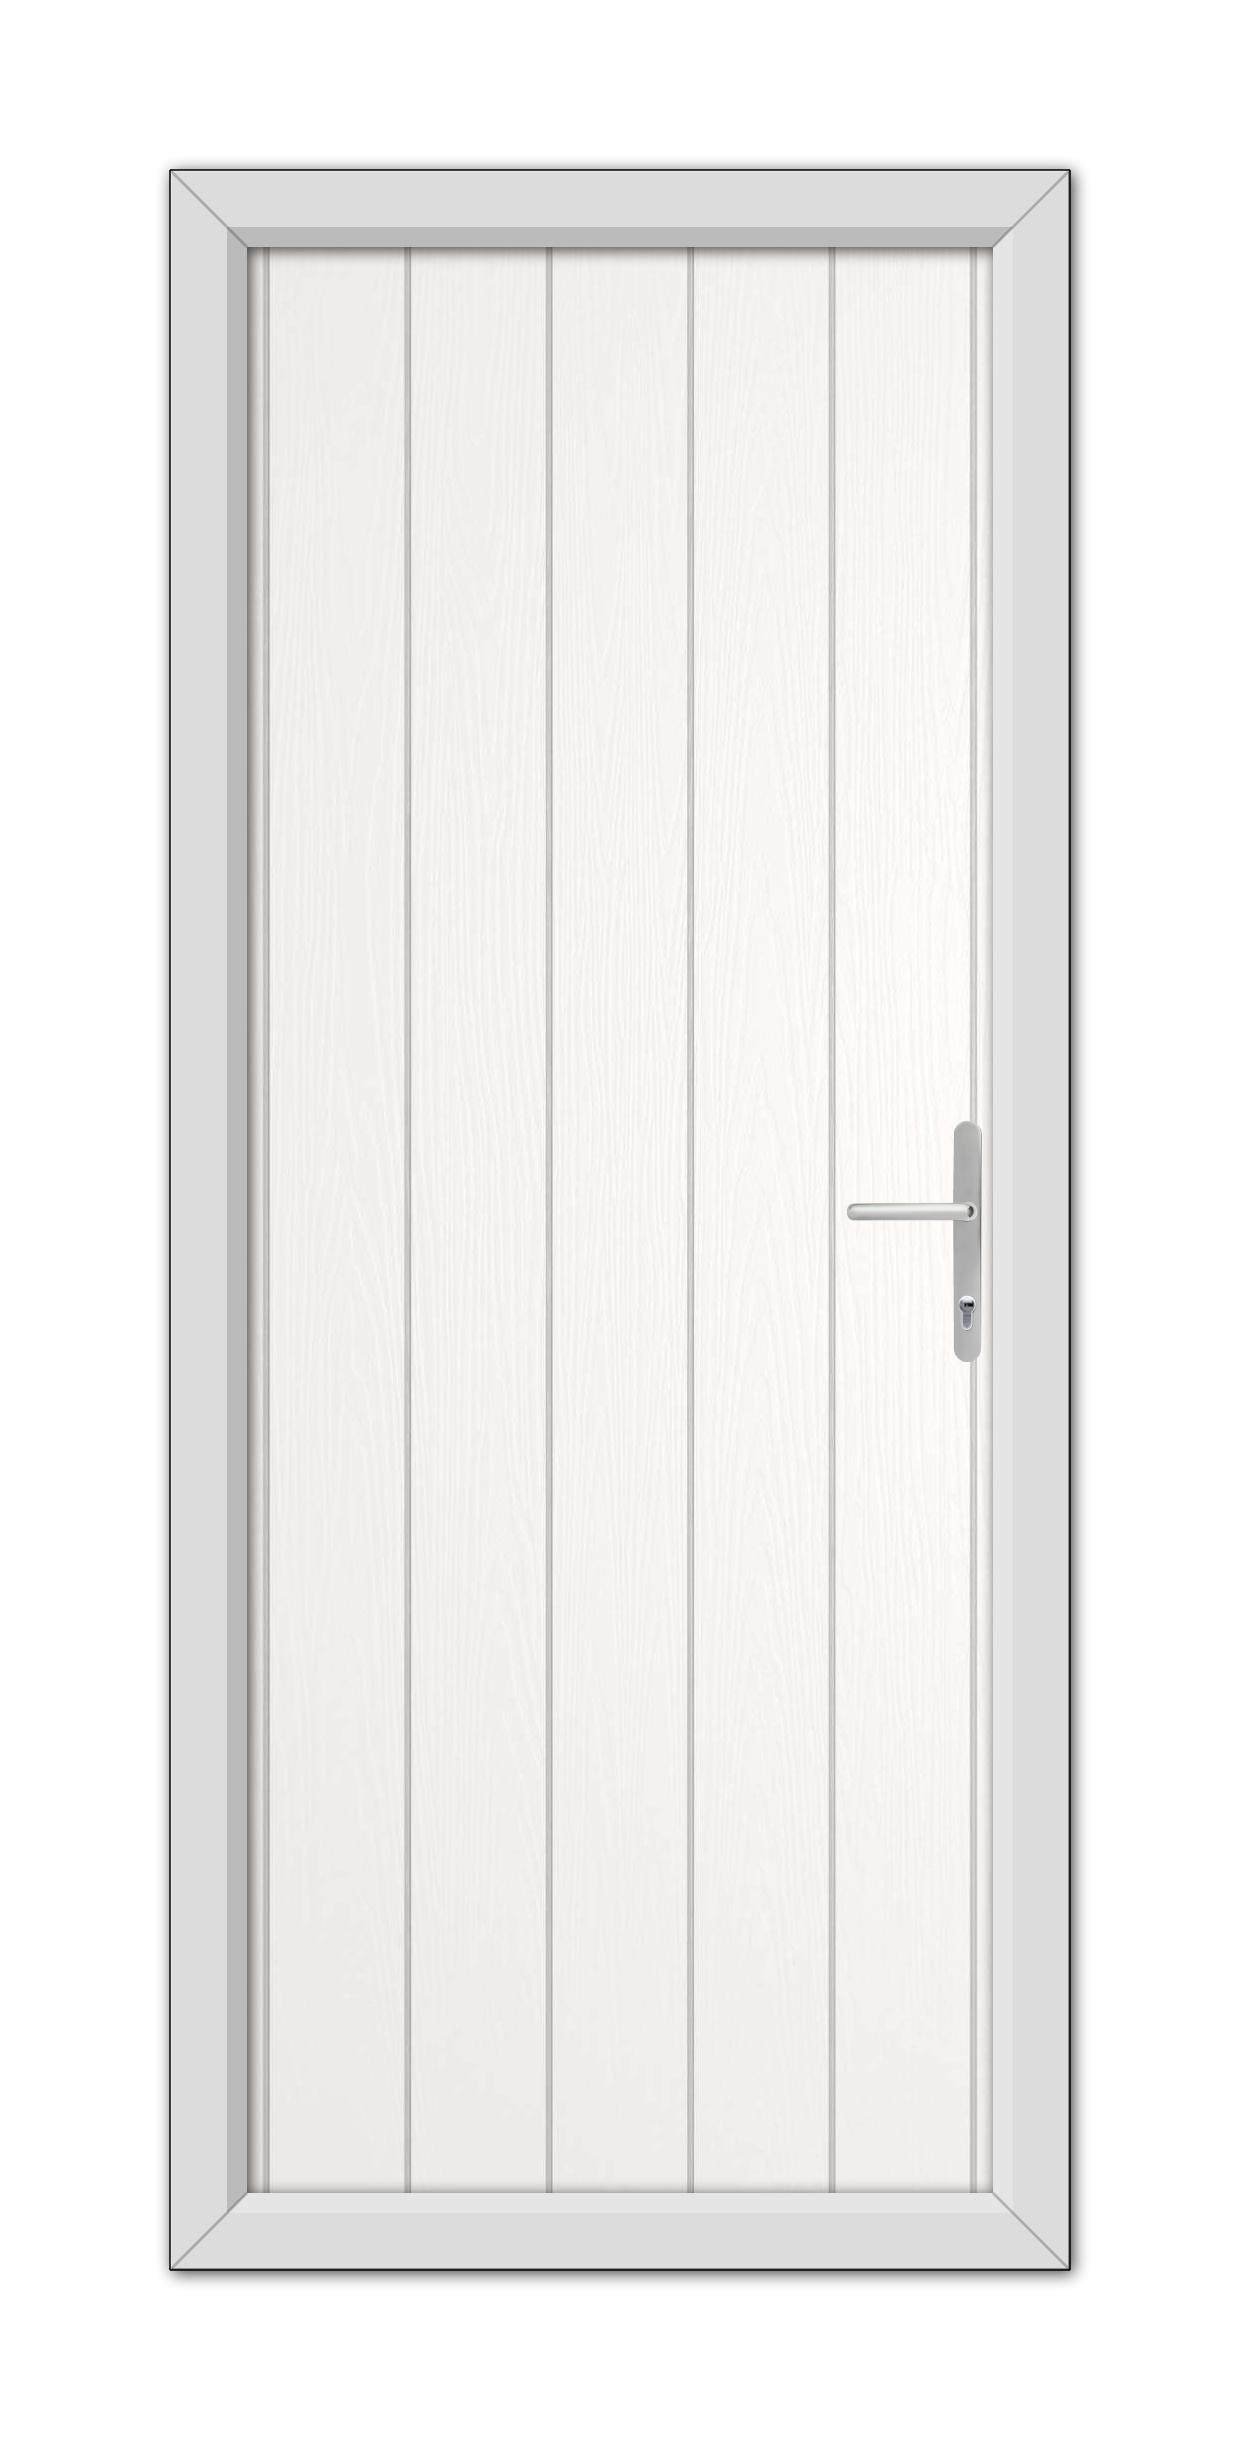 A White Gloucester Composite Door 48mm Timber Core with a simple handle, set within a plain door frame, viewed head-on.